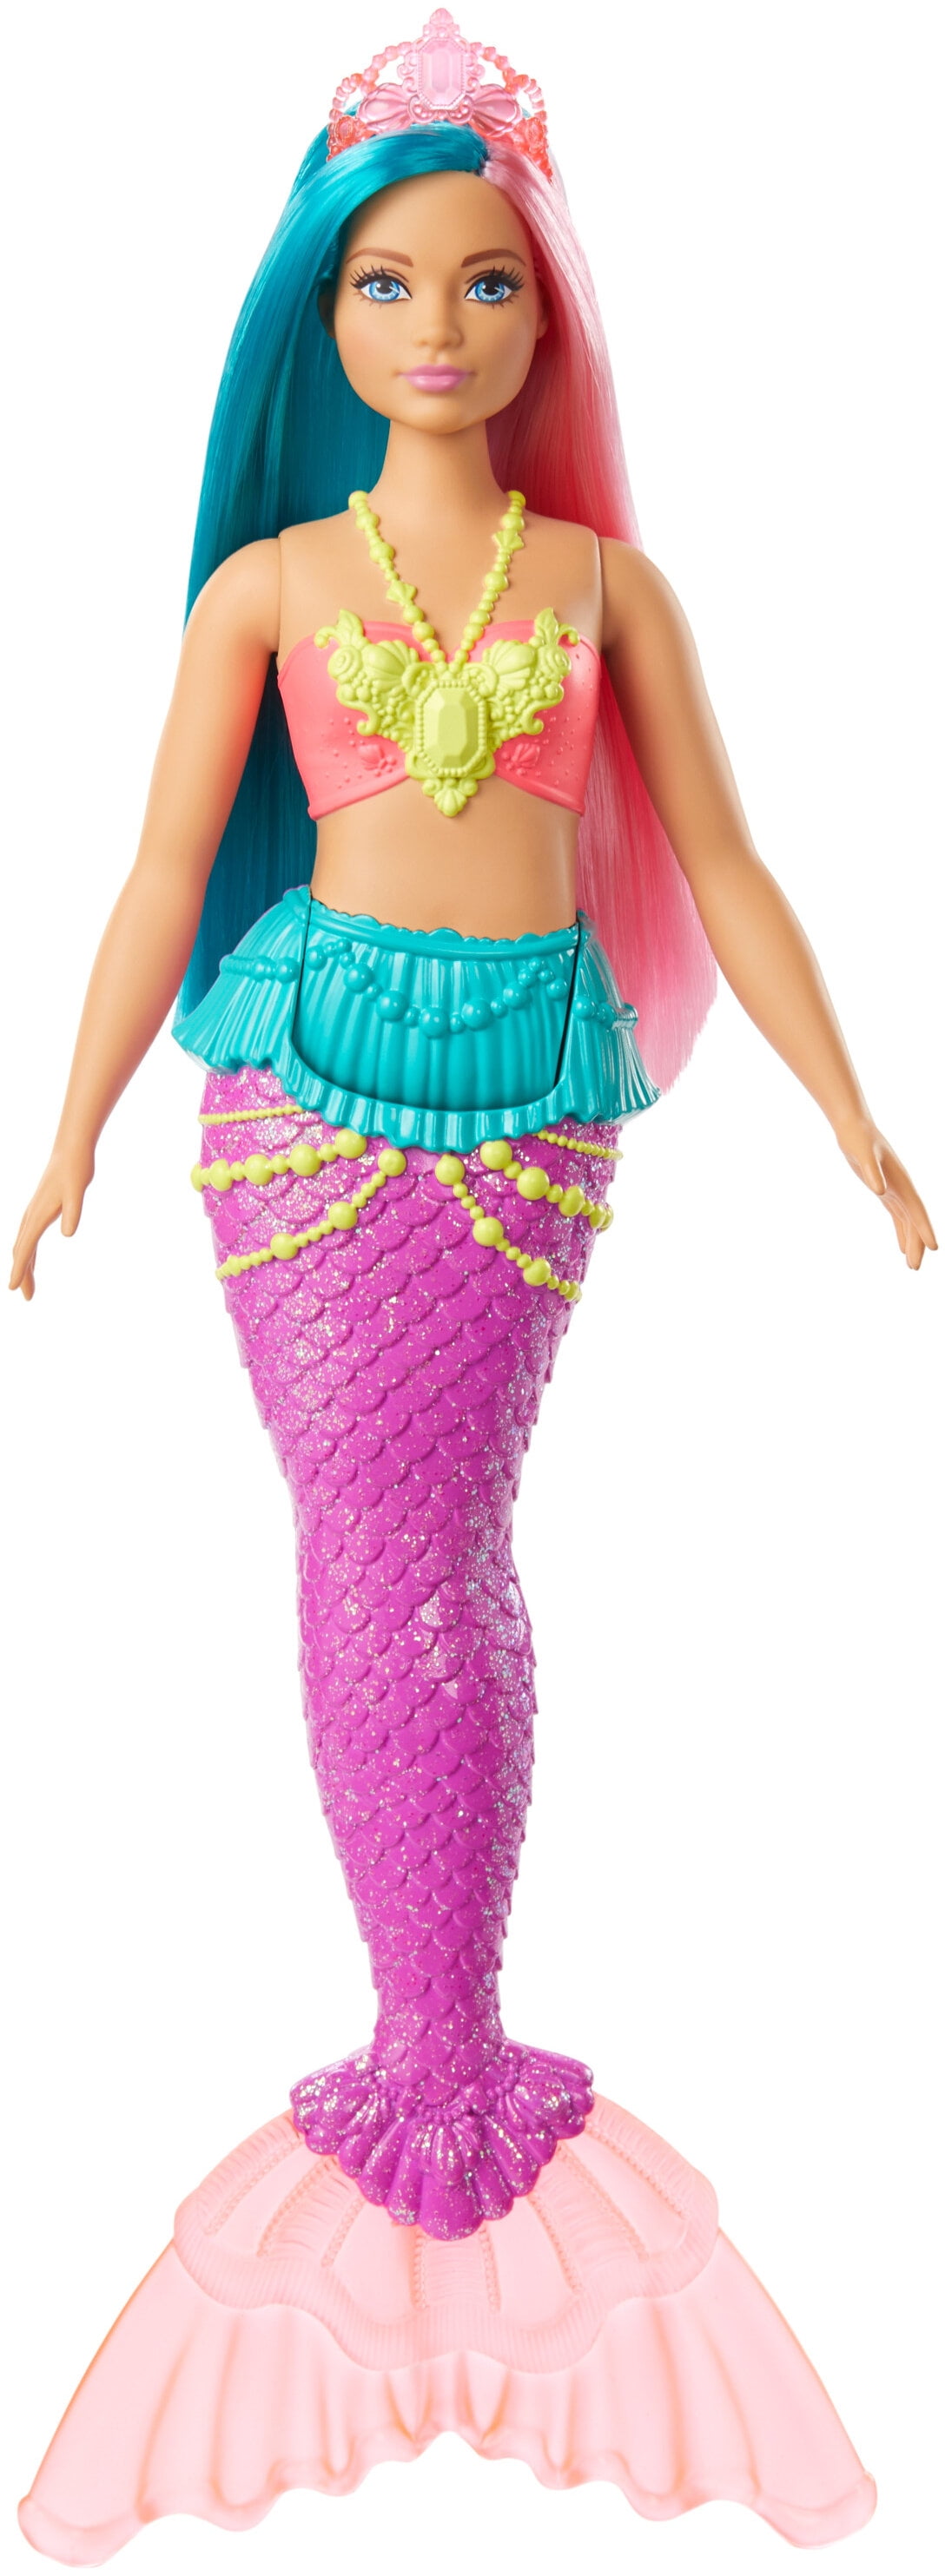 Partial custom Bone Barbie Dreamtopia Mermaid Doll, 12-inch, Teal and Pink Hair, with Tiara,  Gift for 3 to 7 Year Olds - Walmart.com